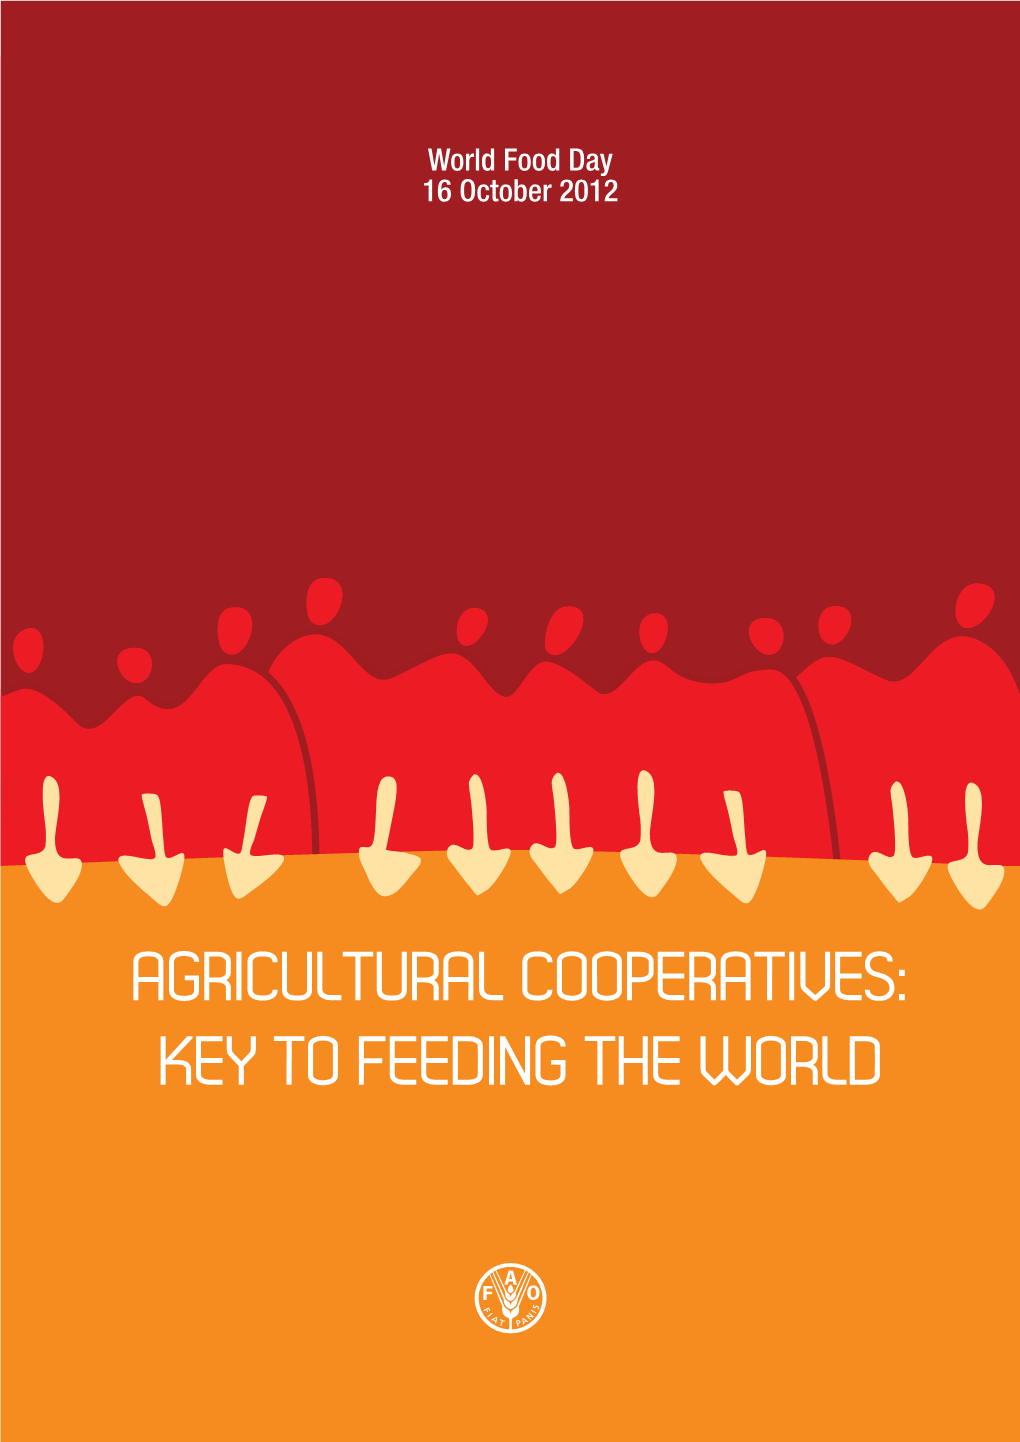 World Food Day 2012 / Agricultural Cooperatives